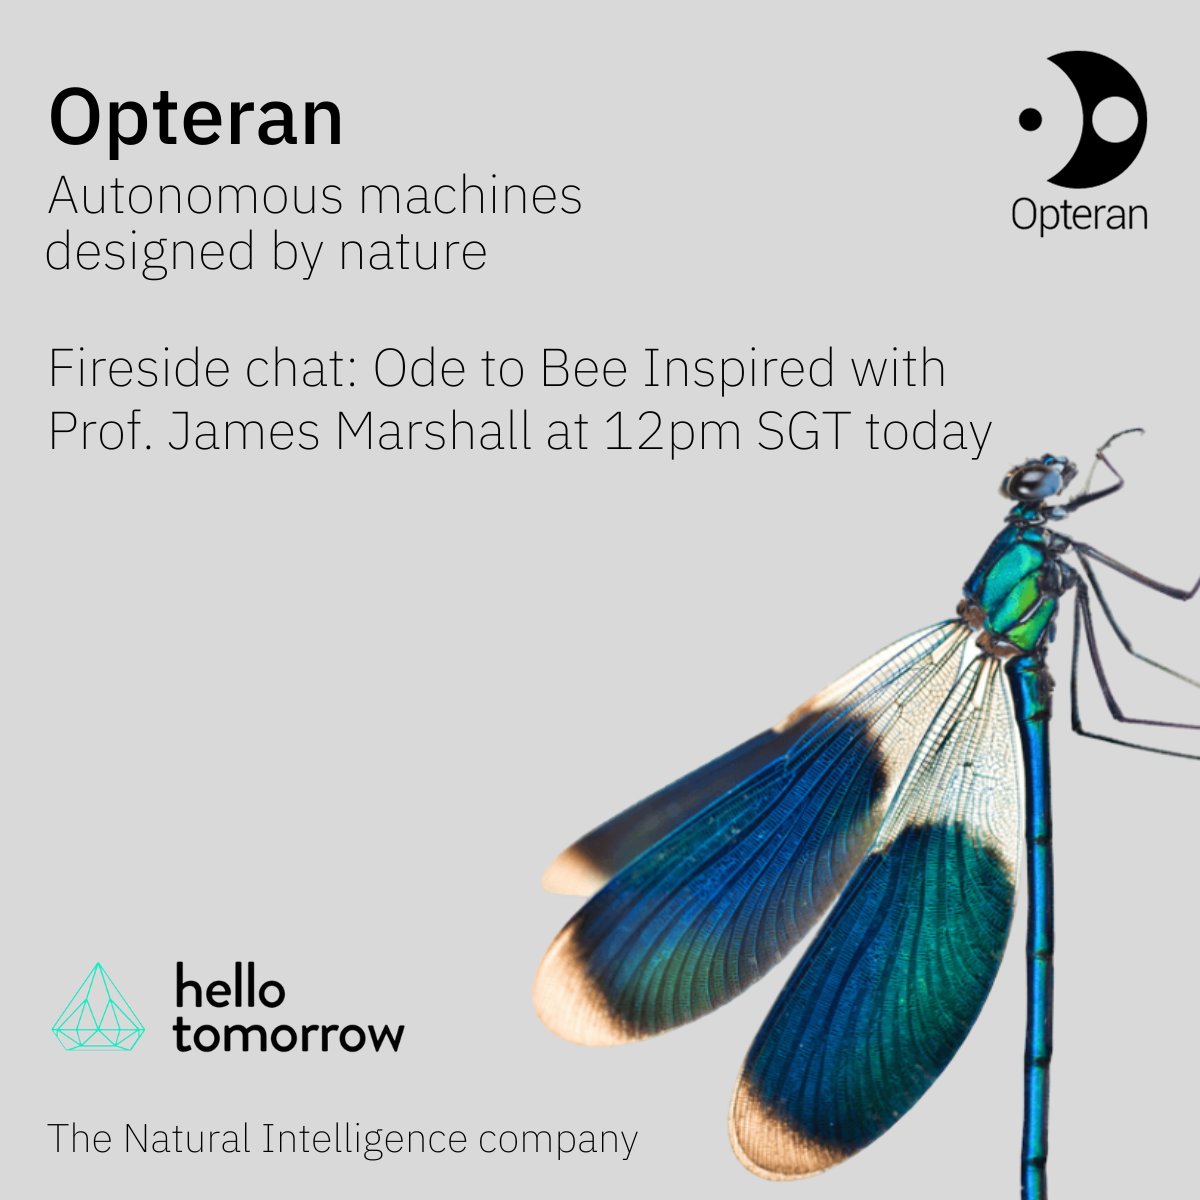 Join Veronica Harwood-Stevenson for a @HelloTomorrow fireside chat with Prof. James Marshall on their mutual love of bees and his inspiration for @Opteran! #DeepTechPioneers #HTGlobalChallenge #HTAPACChallenge #HTAPACSummit #DeepTech #HelloTomorrow